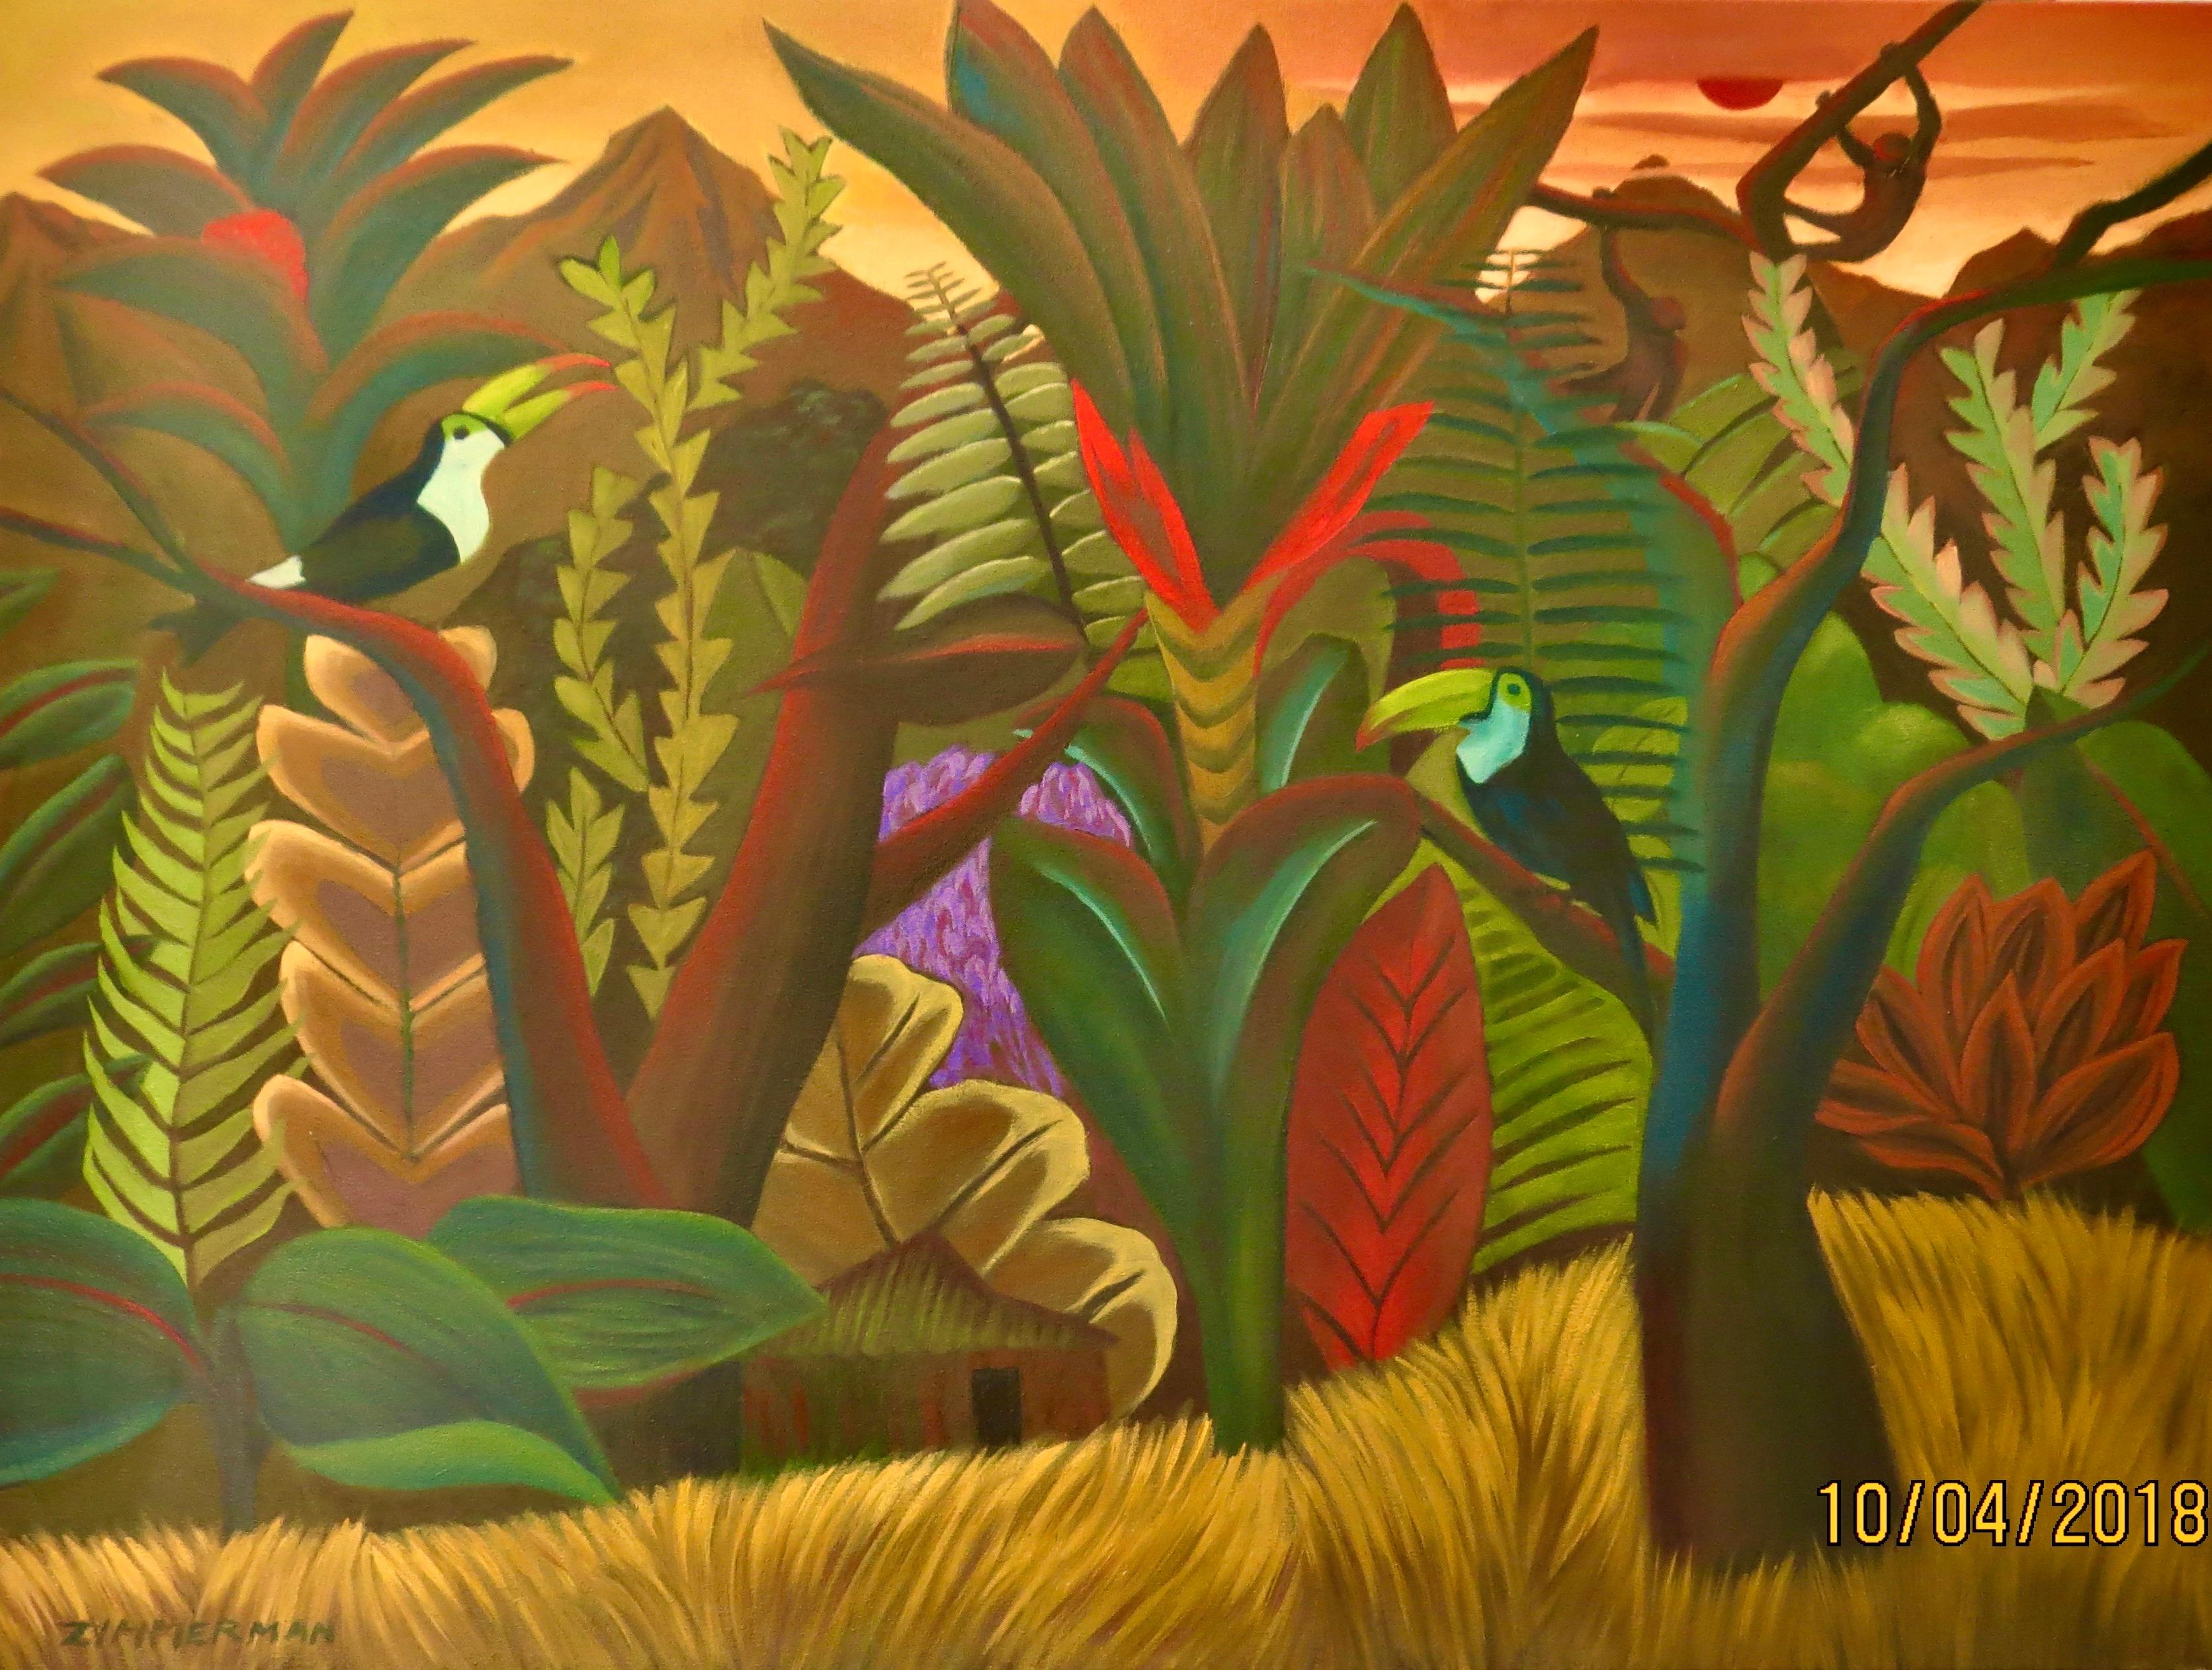 A variety of colorful and surreal plants weave amongst each other. They harmoniously rise in this fantasy jungle as toucans accent the tropical scene.

Toucans in the Jungle - Landscape Painting - Oil on Canvas By Marc Zimmerman


Marc Zimmerman